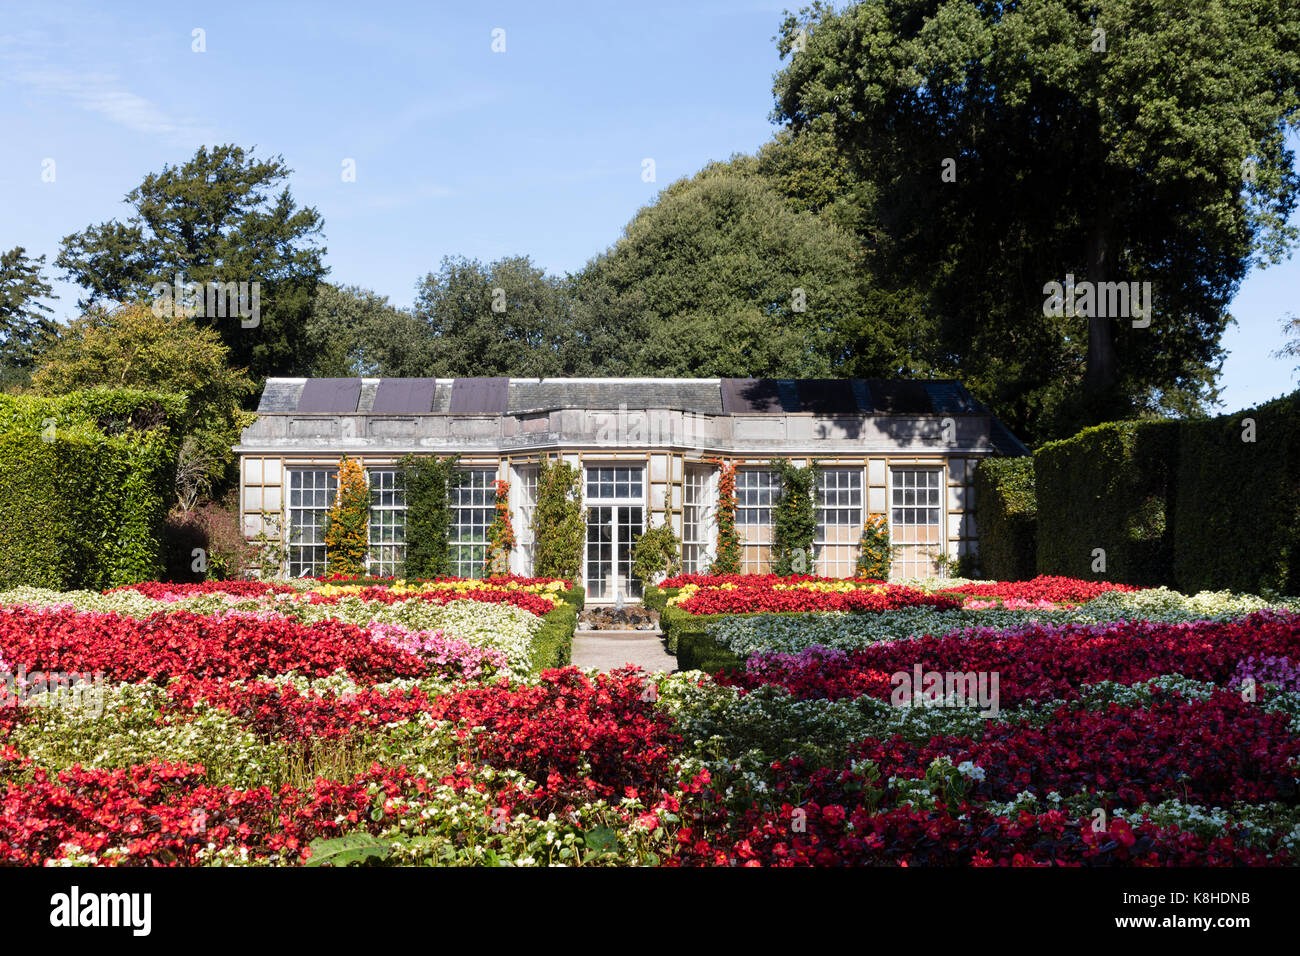 Formal bedding display of brightly colourful begonias in front of the orangery in the French garden at Mount Edgcumbe, Cornwall, UK Stock Photo